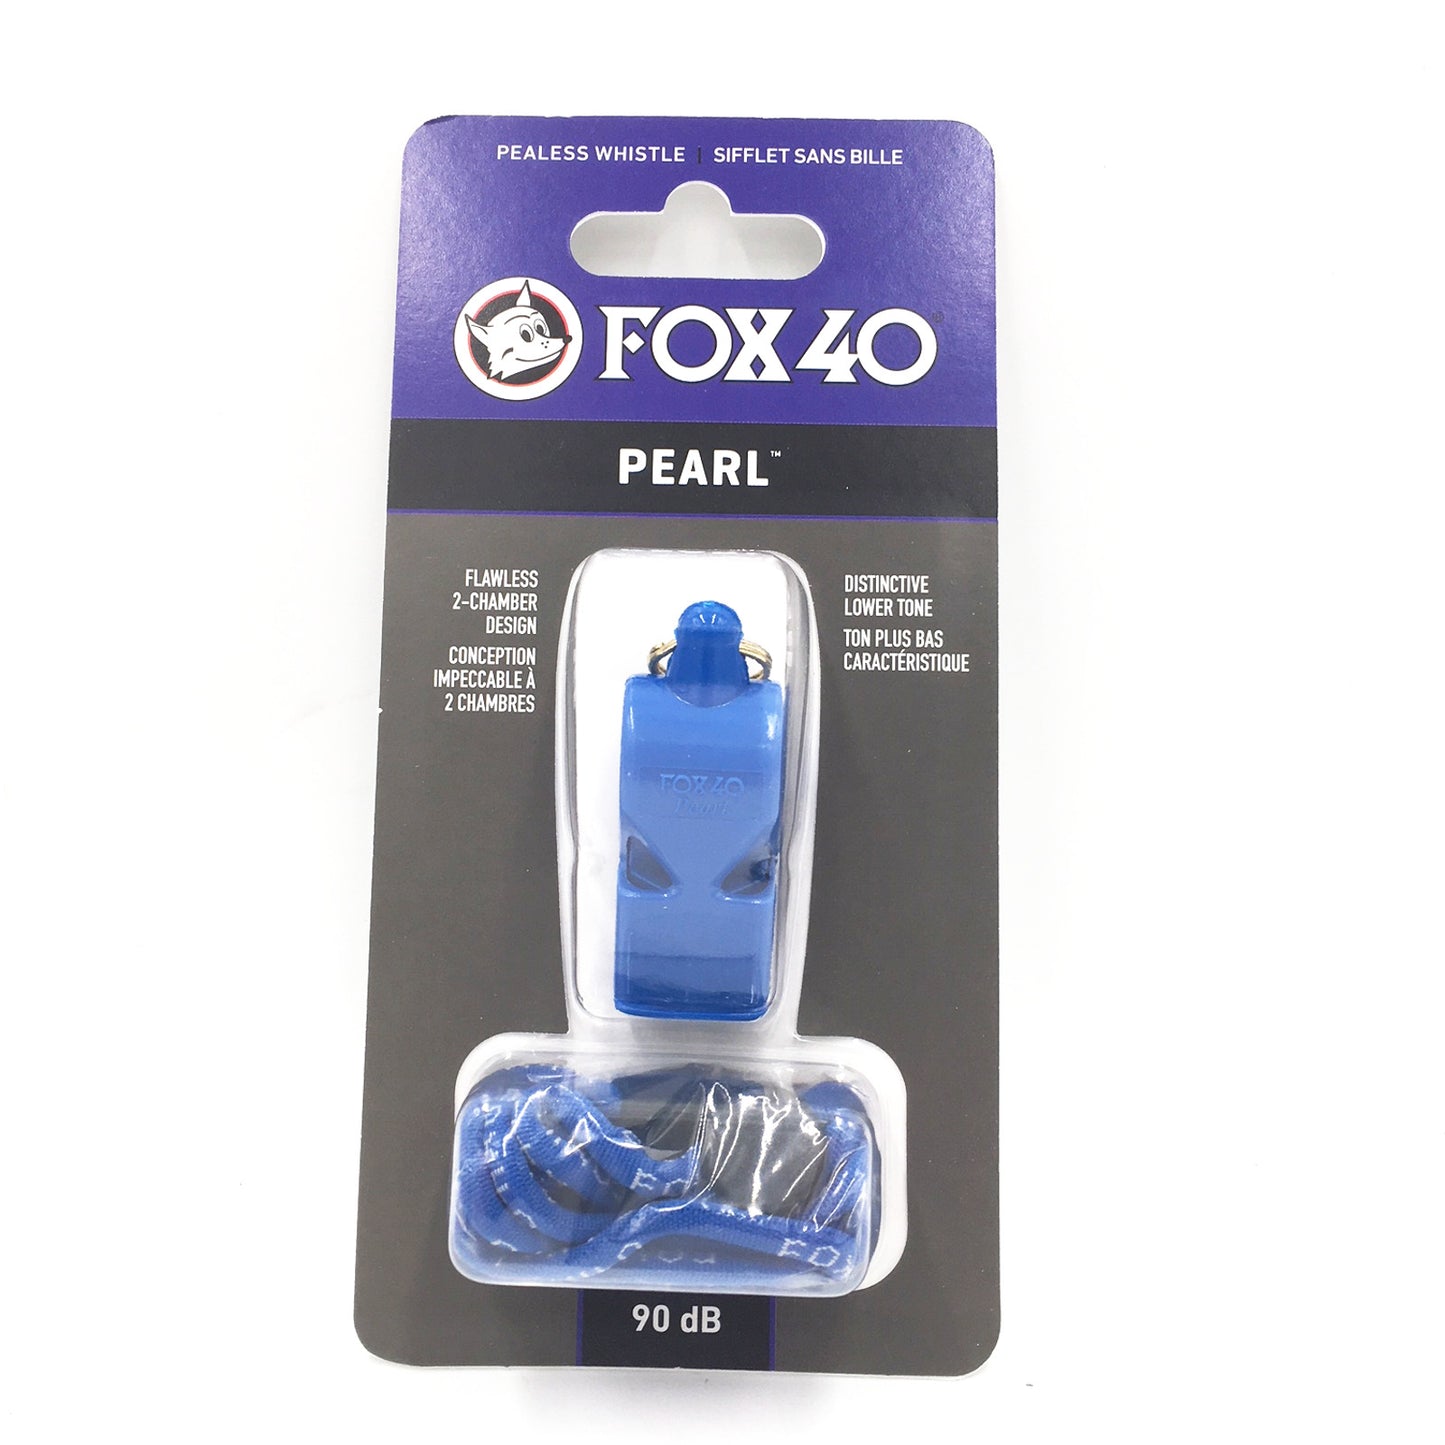 Fox 40 Pearl Whistle With Strap